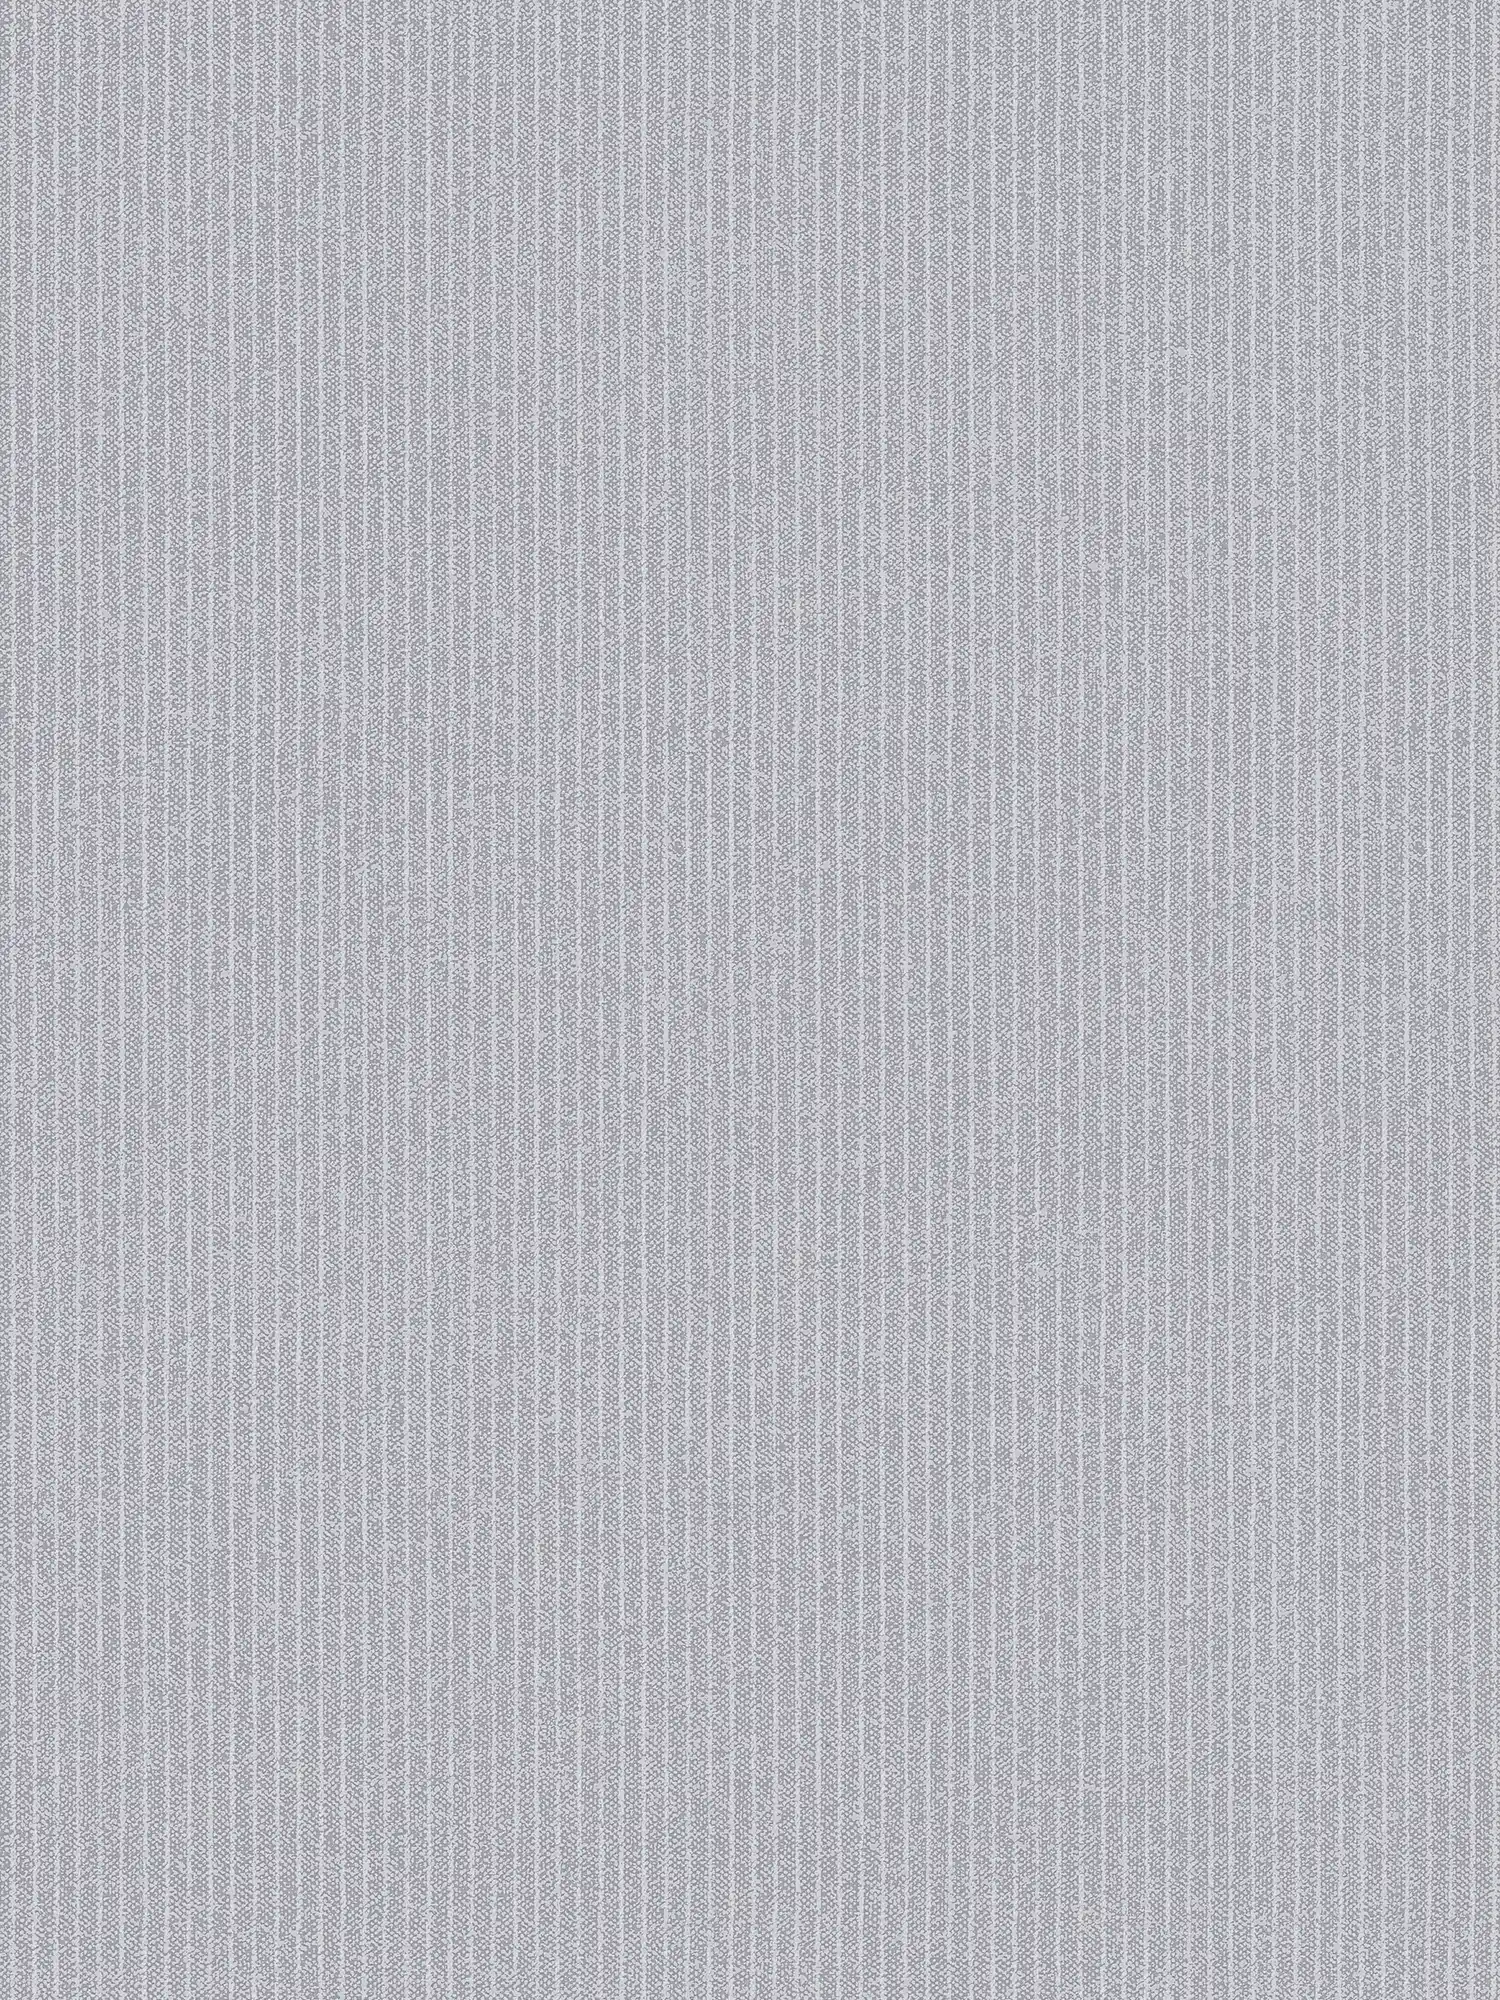 Lined wallpaper narrow stripes in textile look - grey
